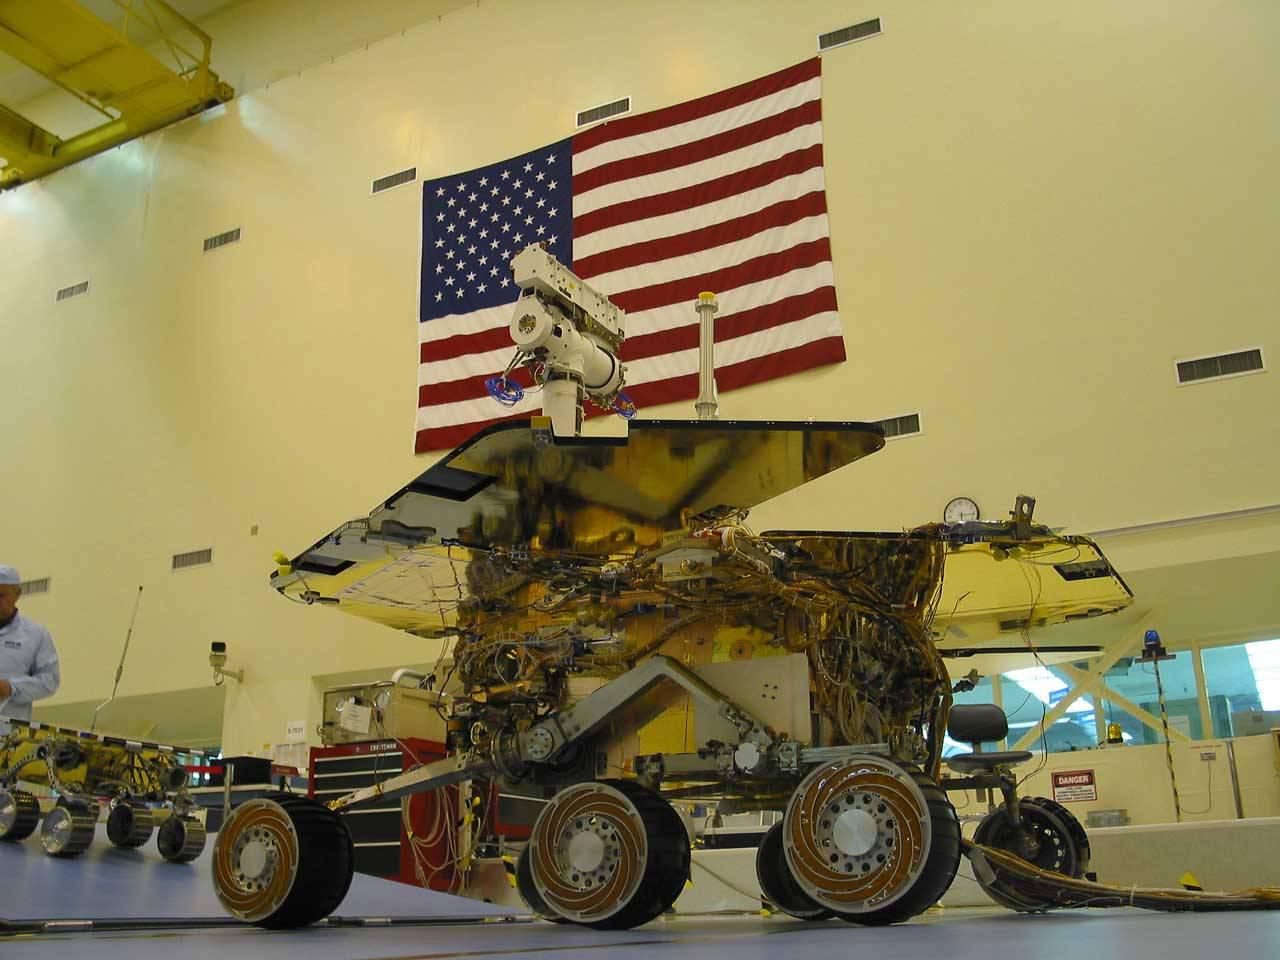 One of two Mars Exploration Rovers sits inside its cruise stage waitingto undergo environmental testing at NASA's Jet PropulsionLaboratory.